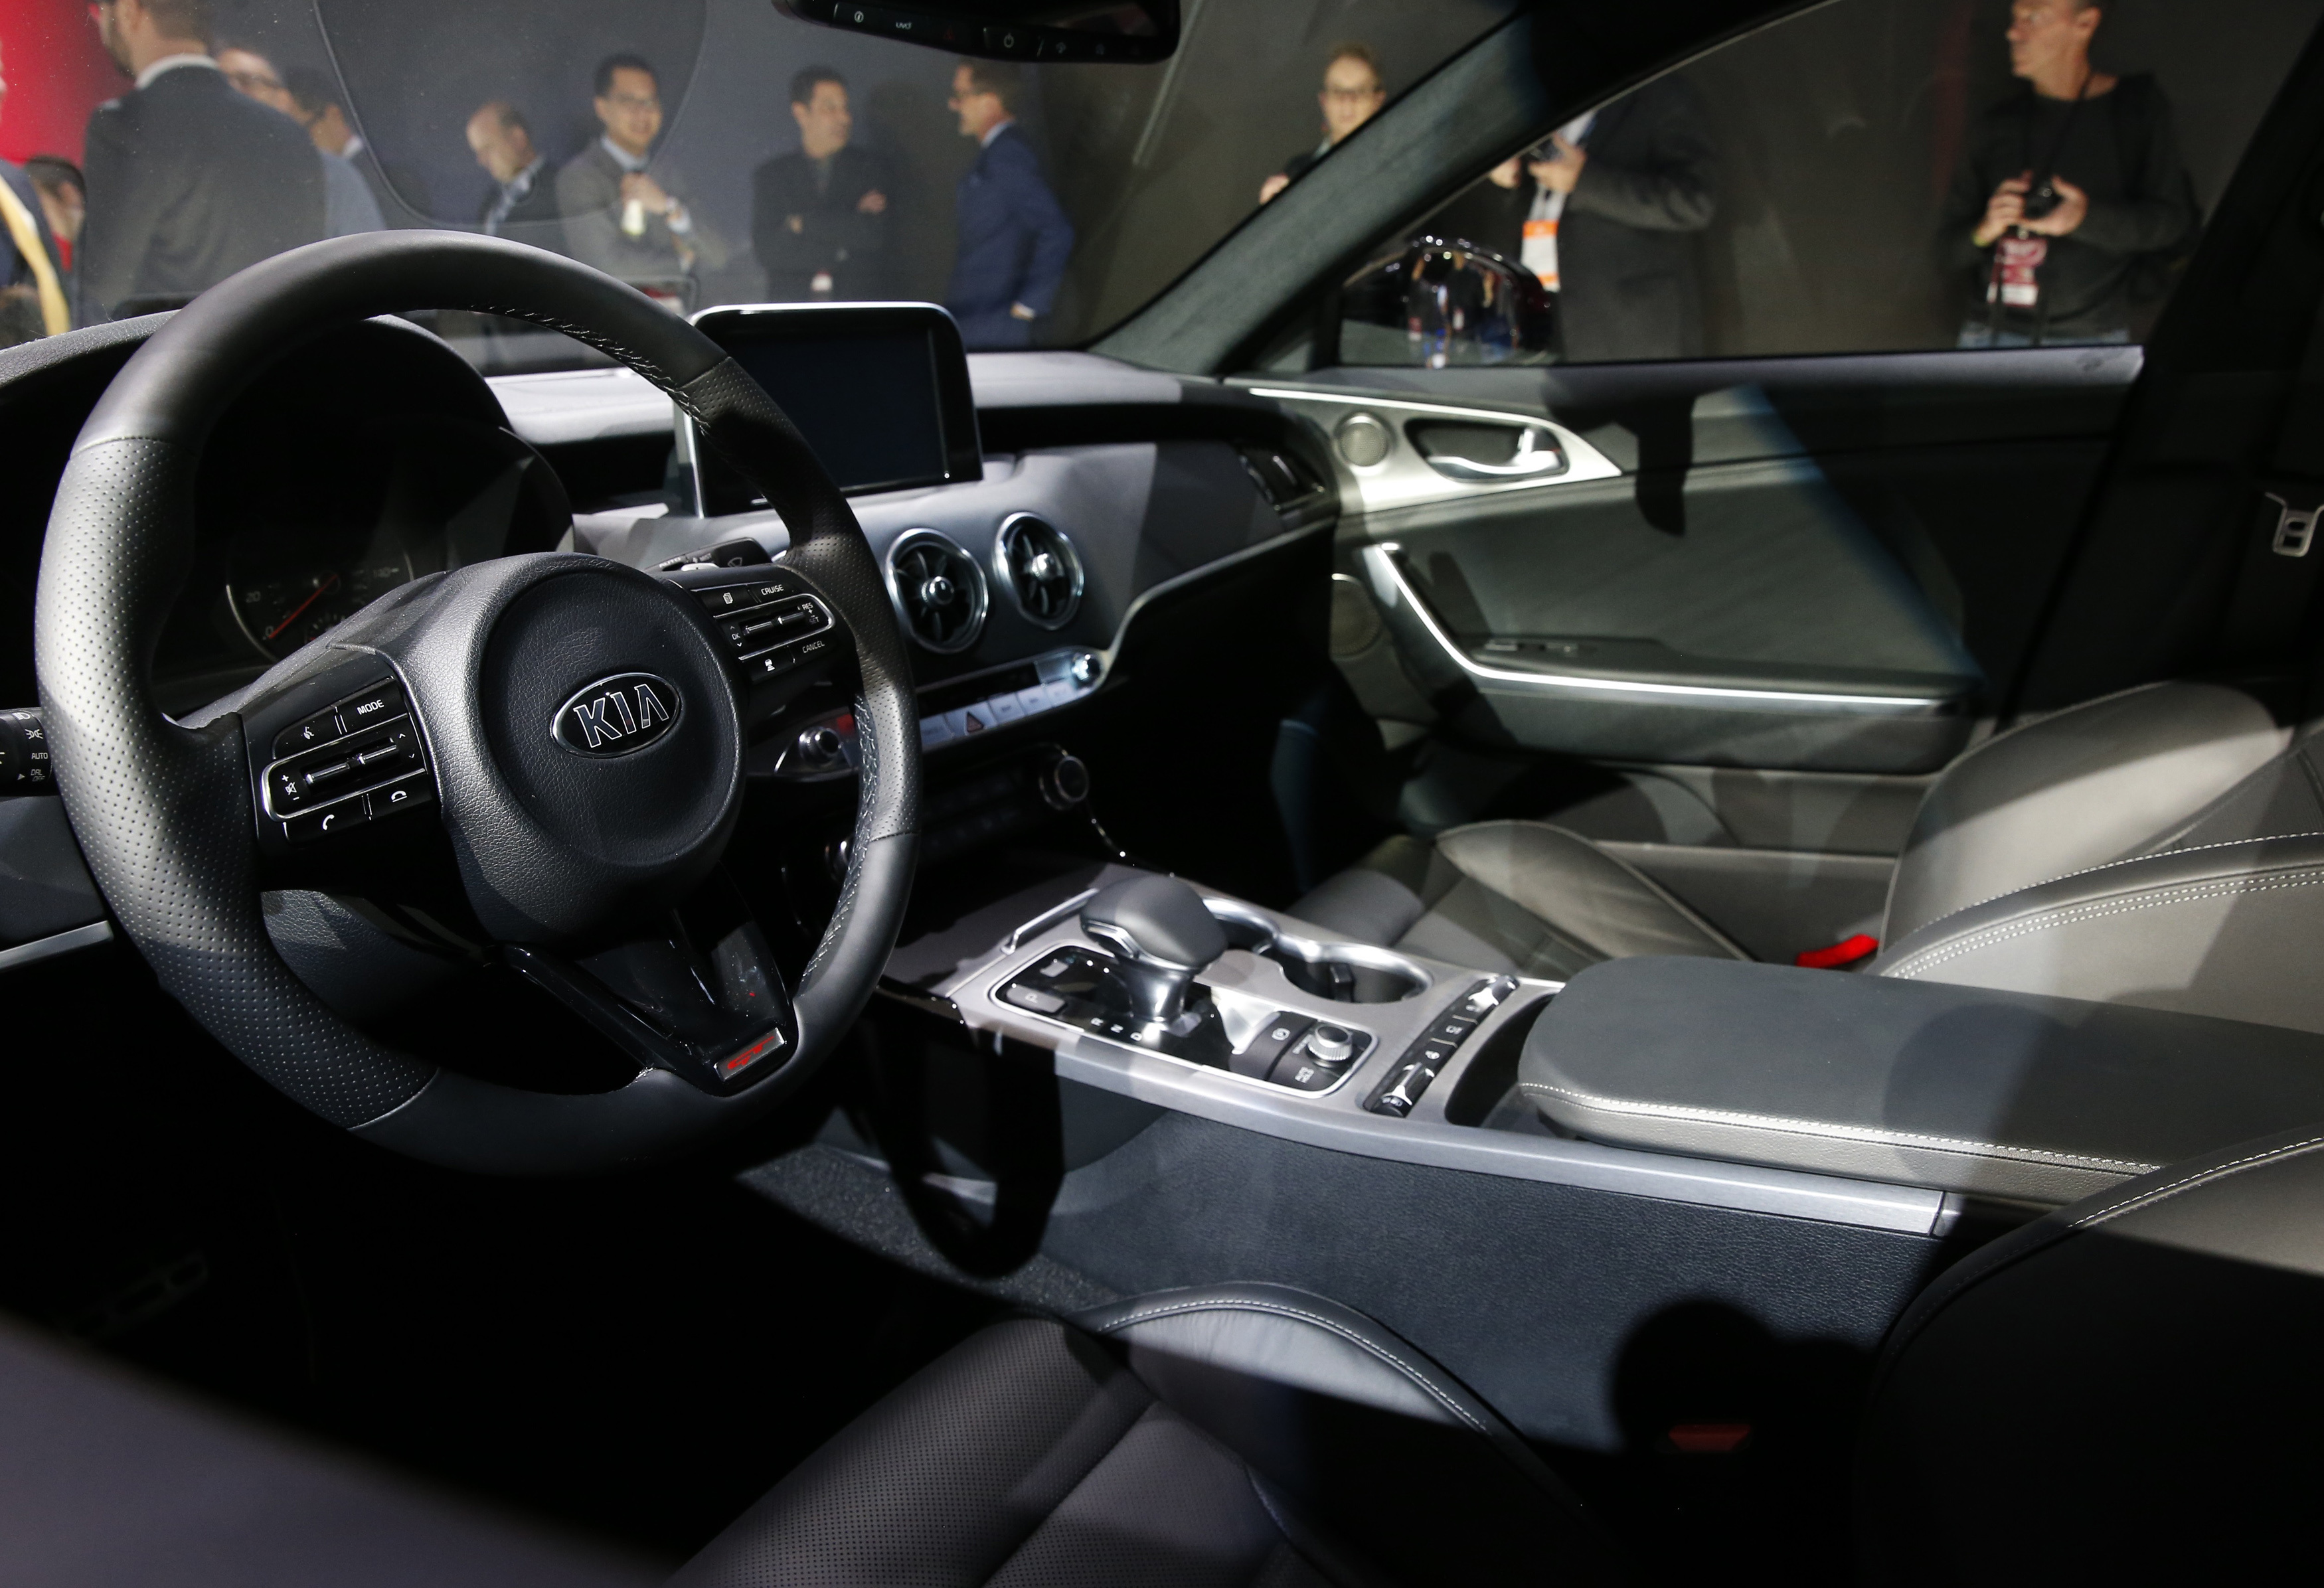 View of the interior of the 2018 Kia Stinger as it is introduced during the North American International Auto Show in Detroit